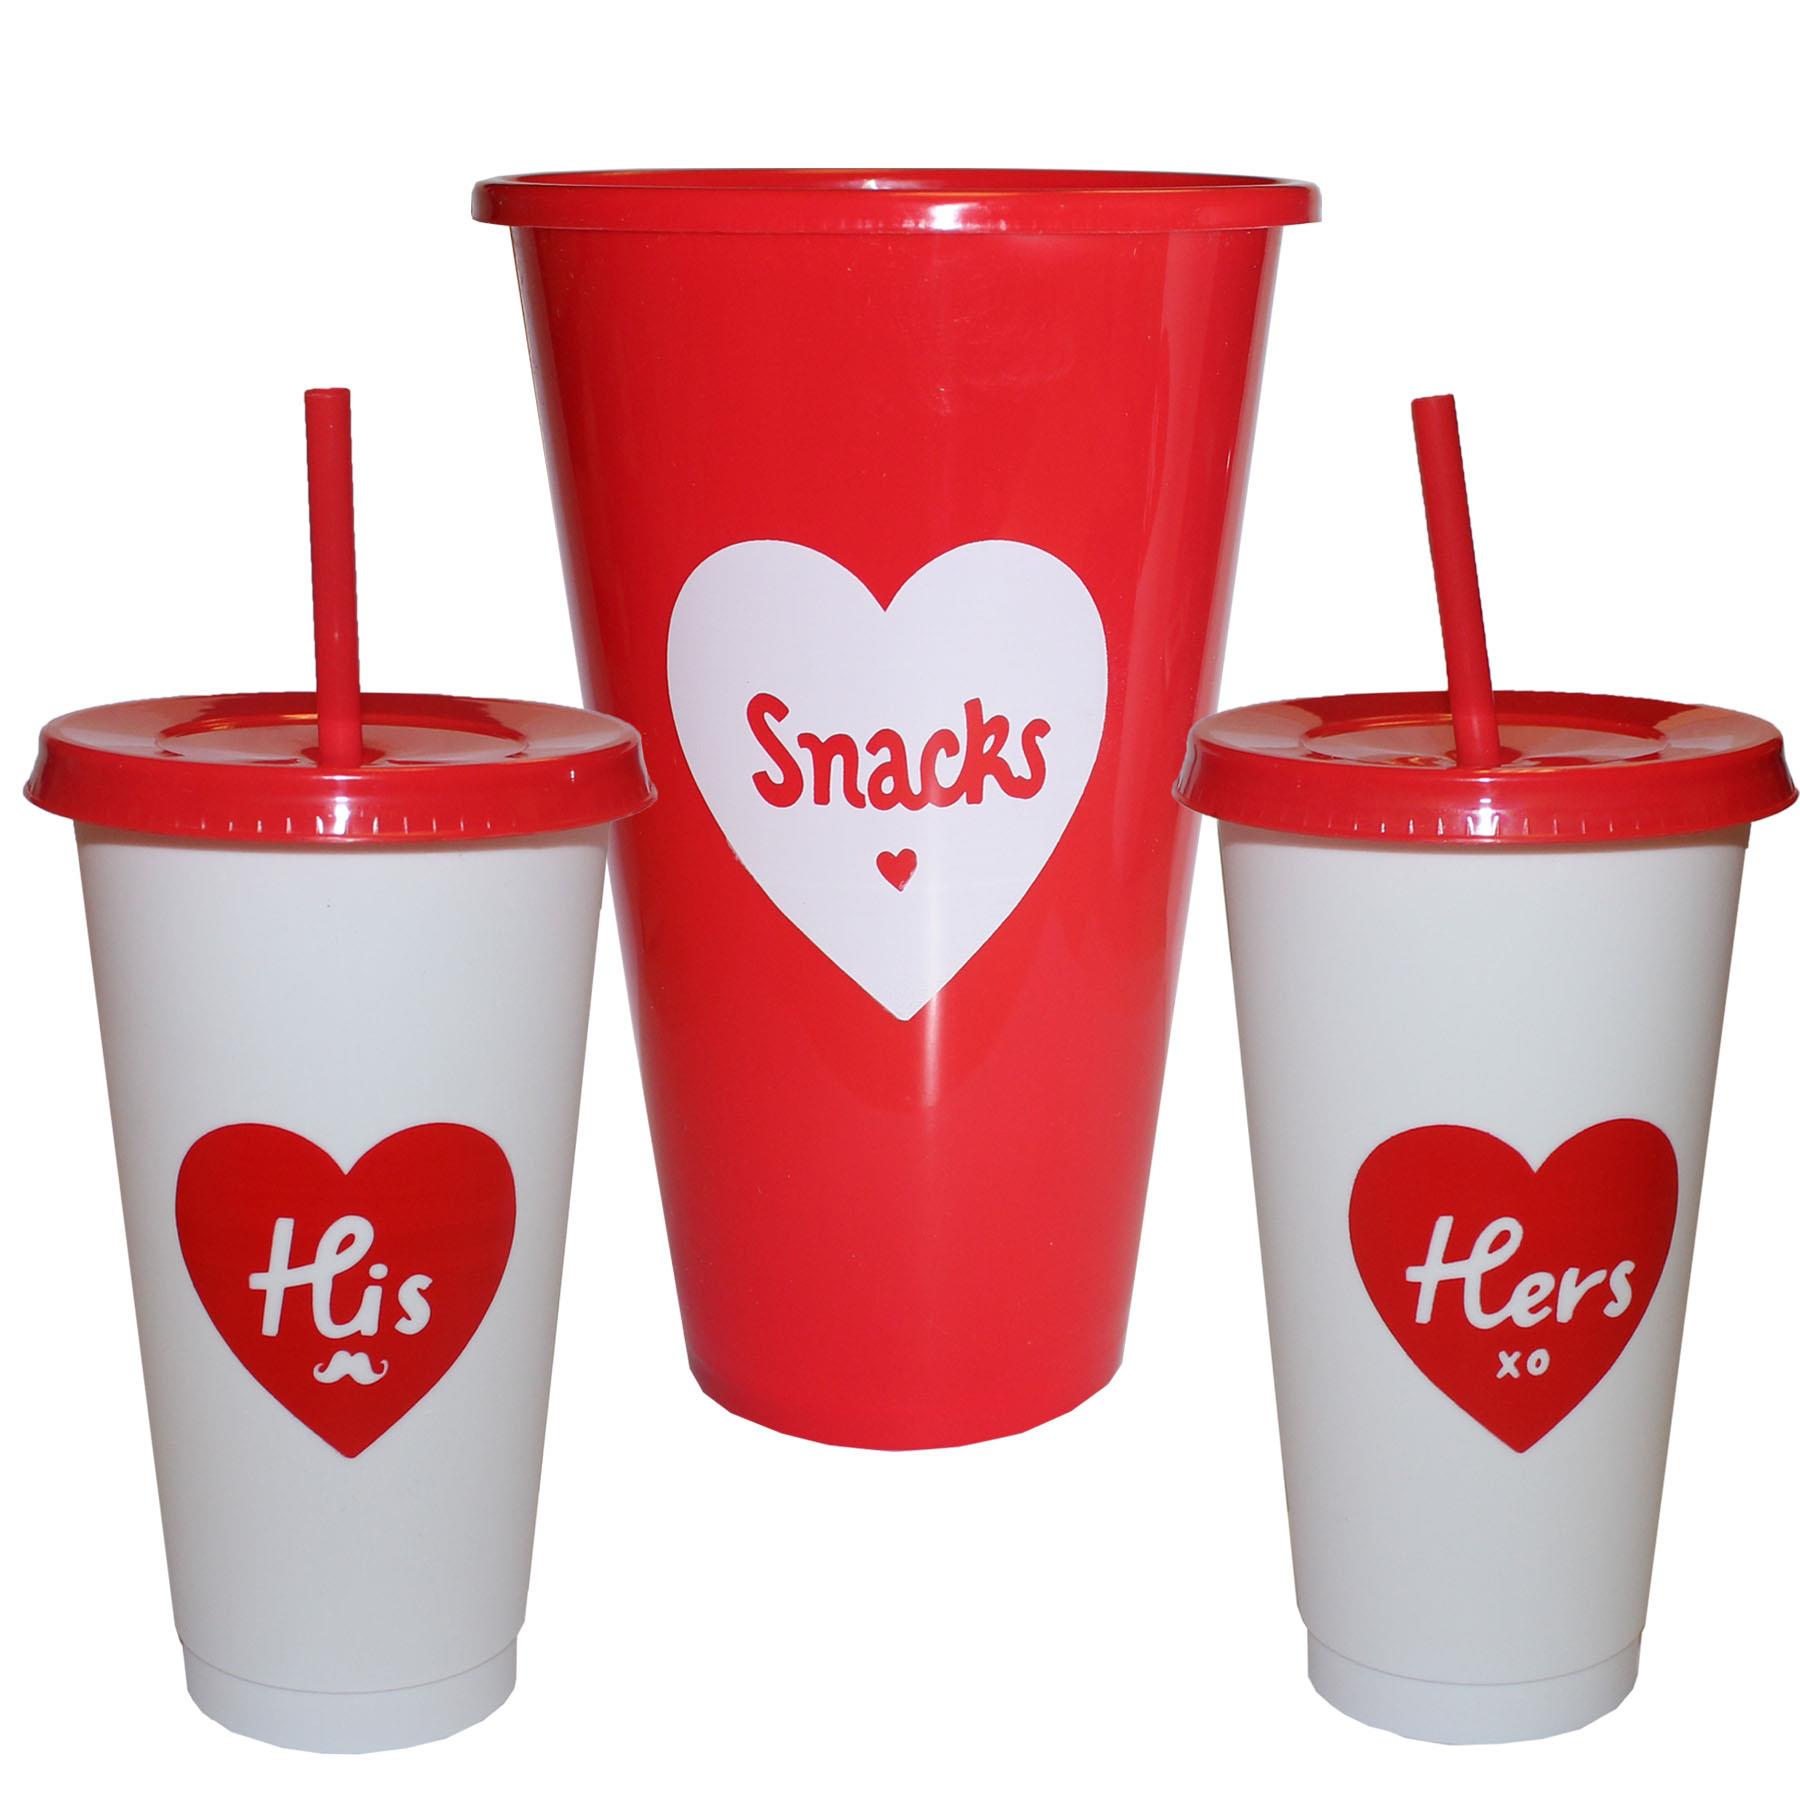 Valentines Movie Night At Home Date Night Set - Popcorn Holder, and 2 Cups with Straws